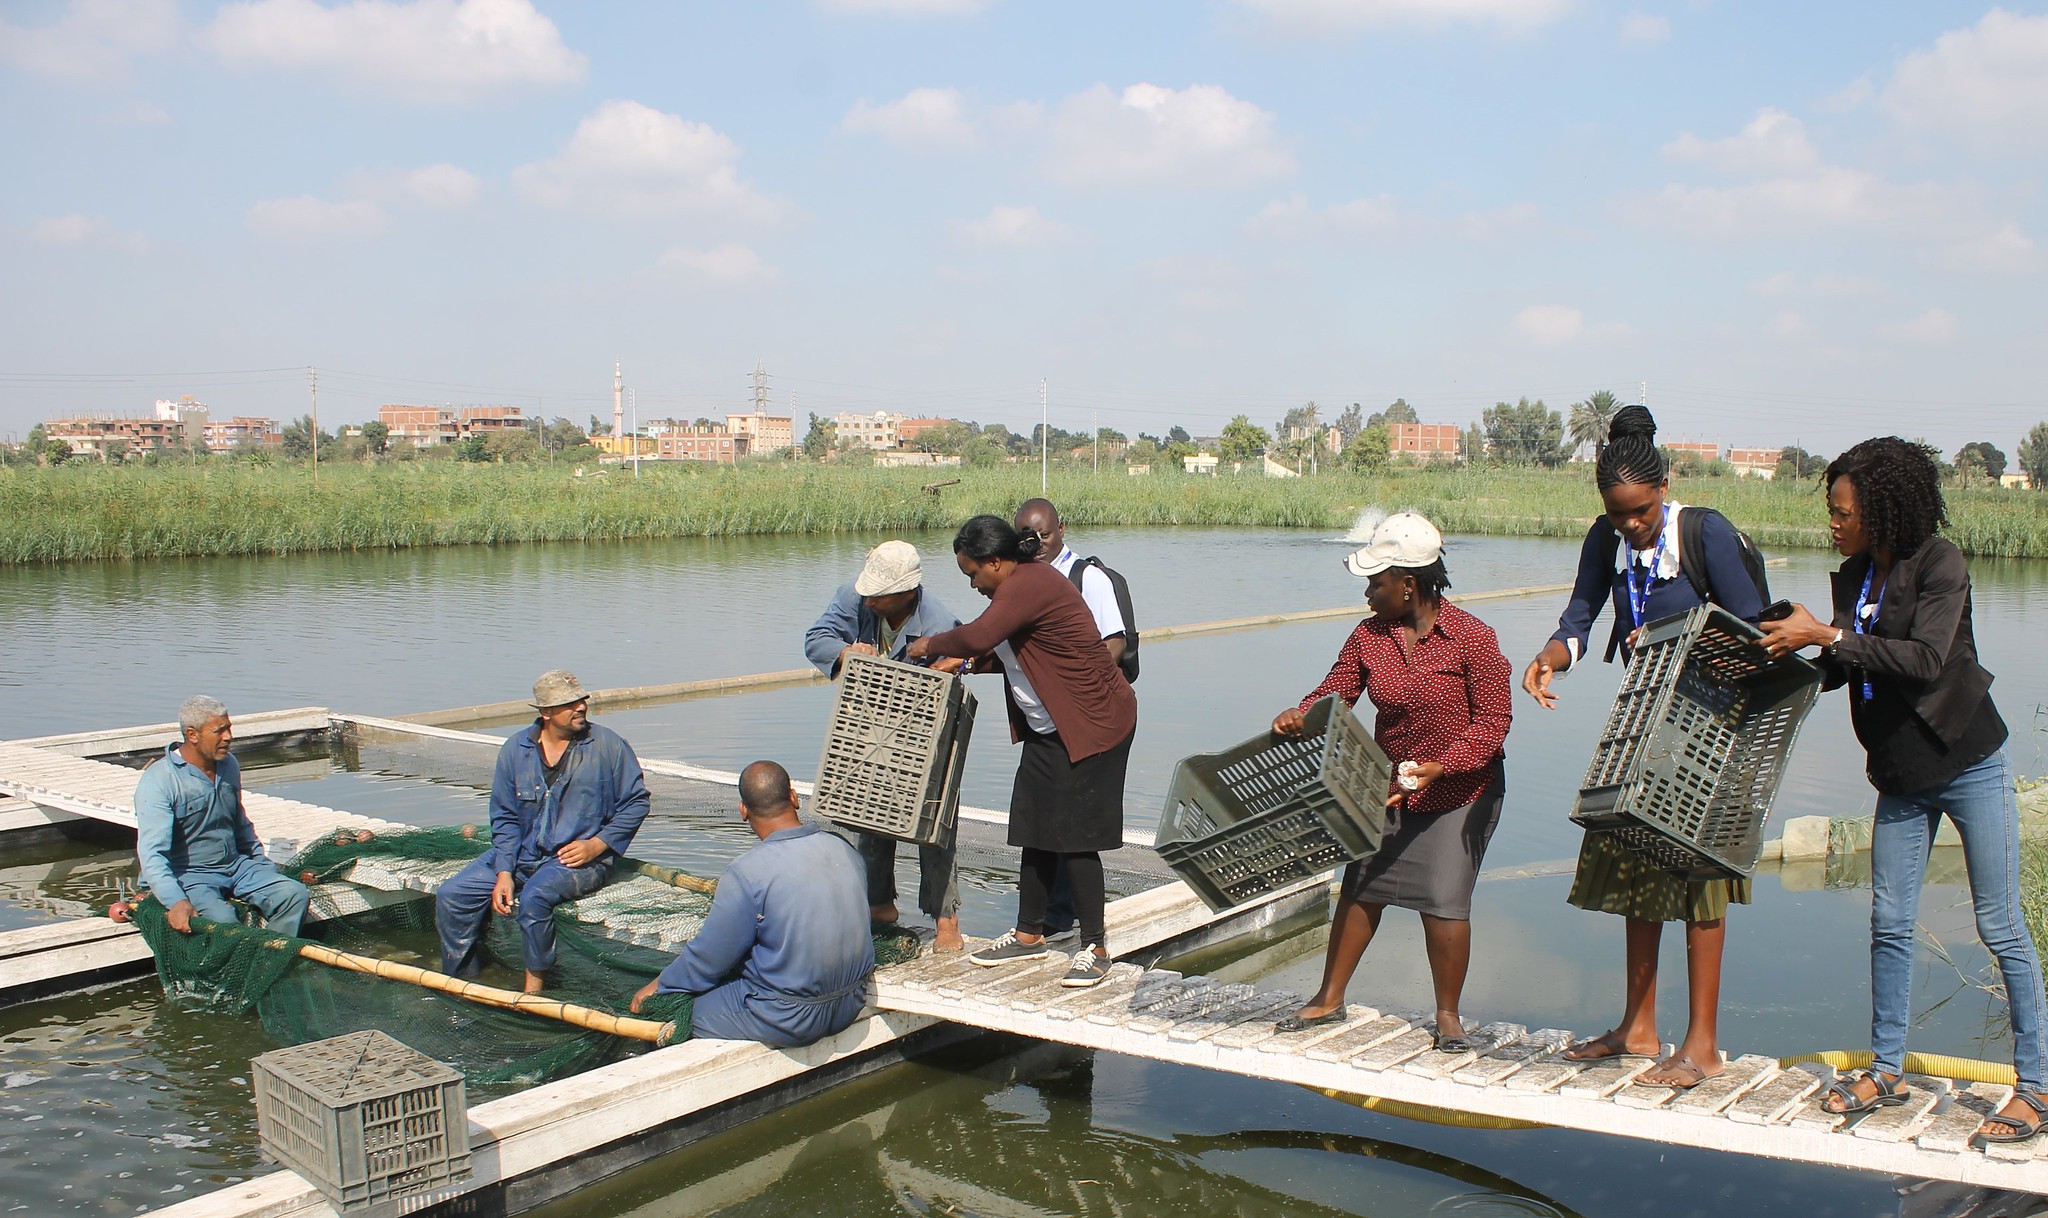 Contributions of small-scale fishers and farmers must be included in policy and investment reform to ensure inclusivity. Photo by Yehia Abdel Menaim